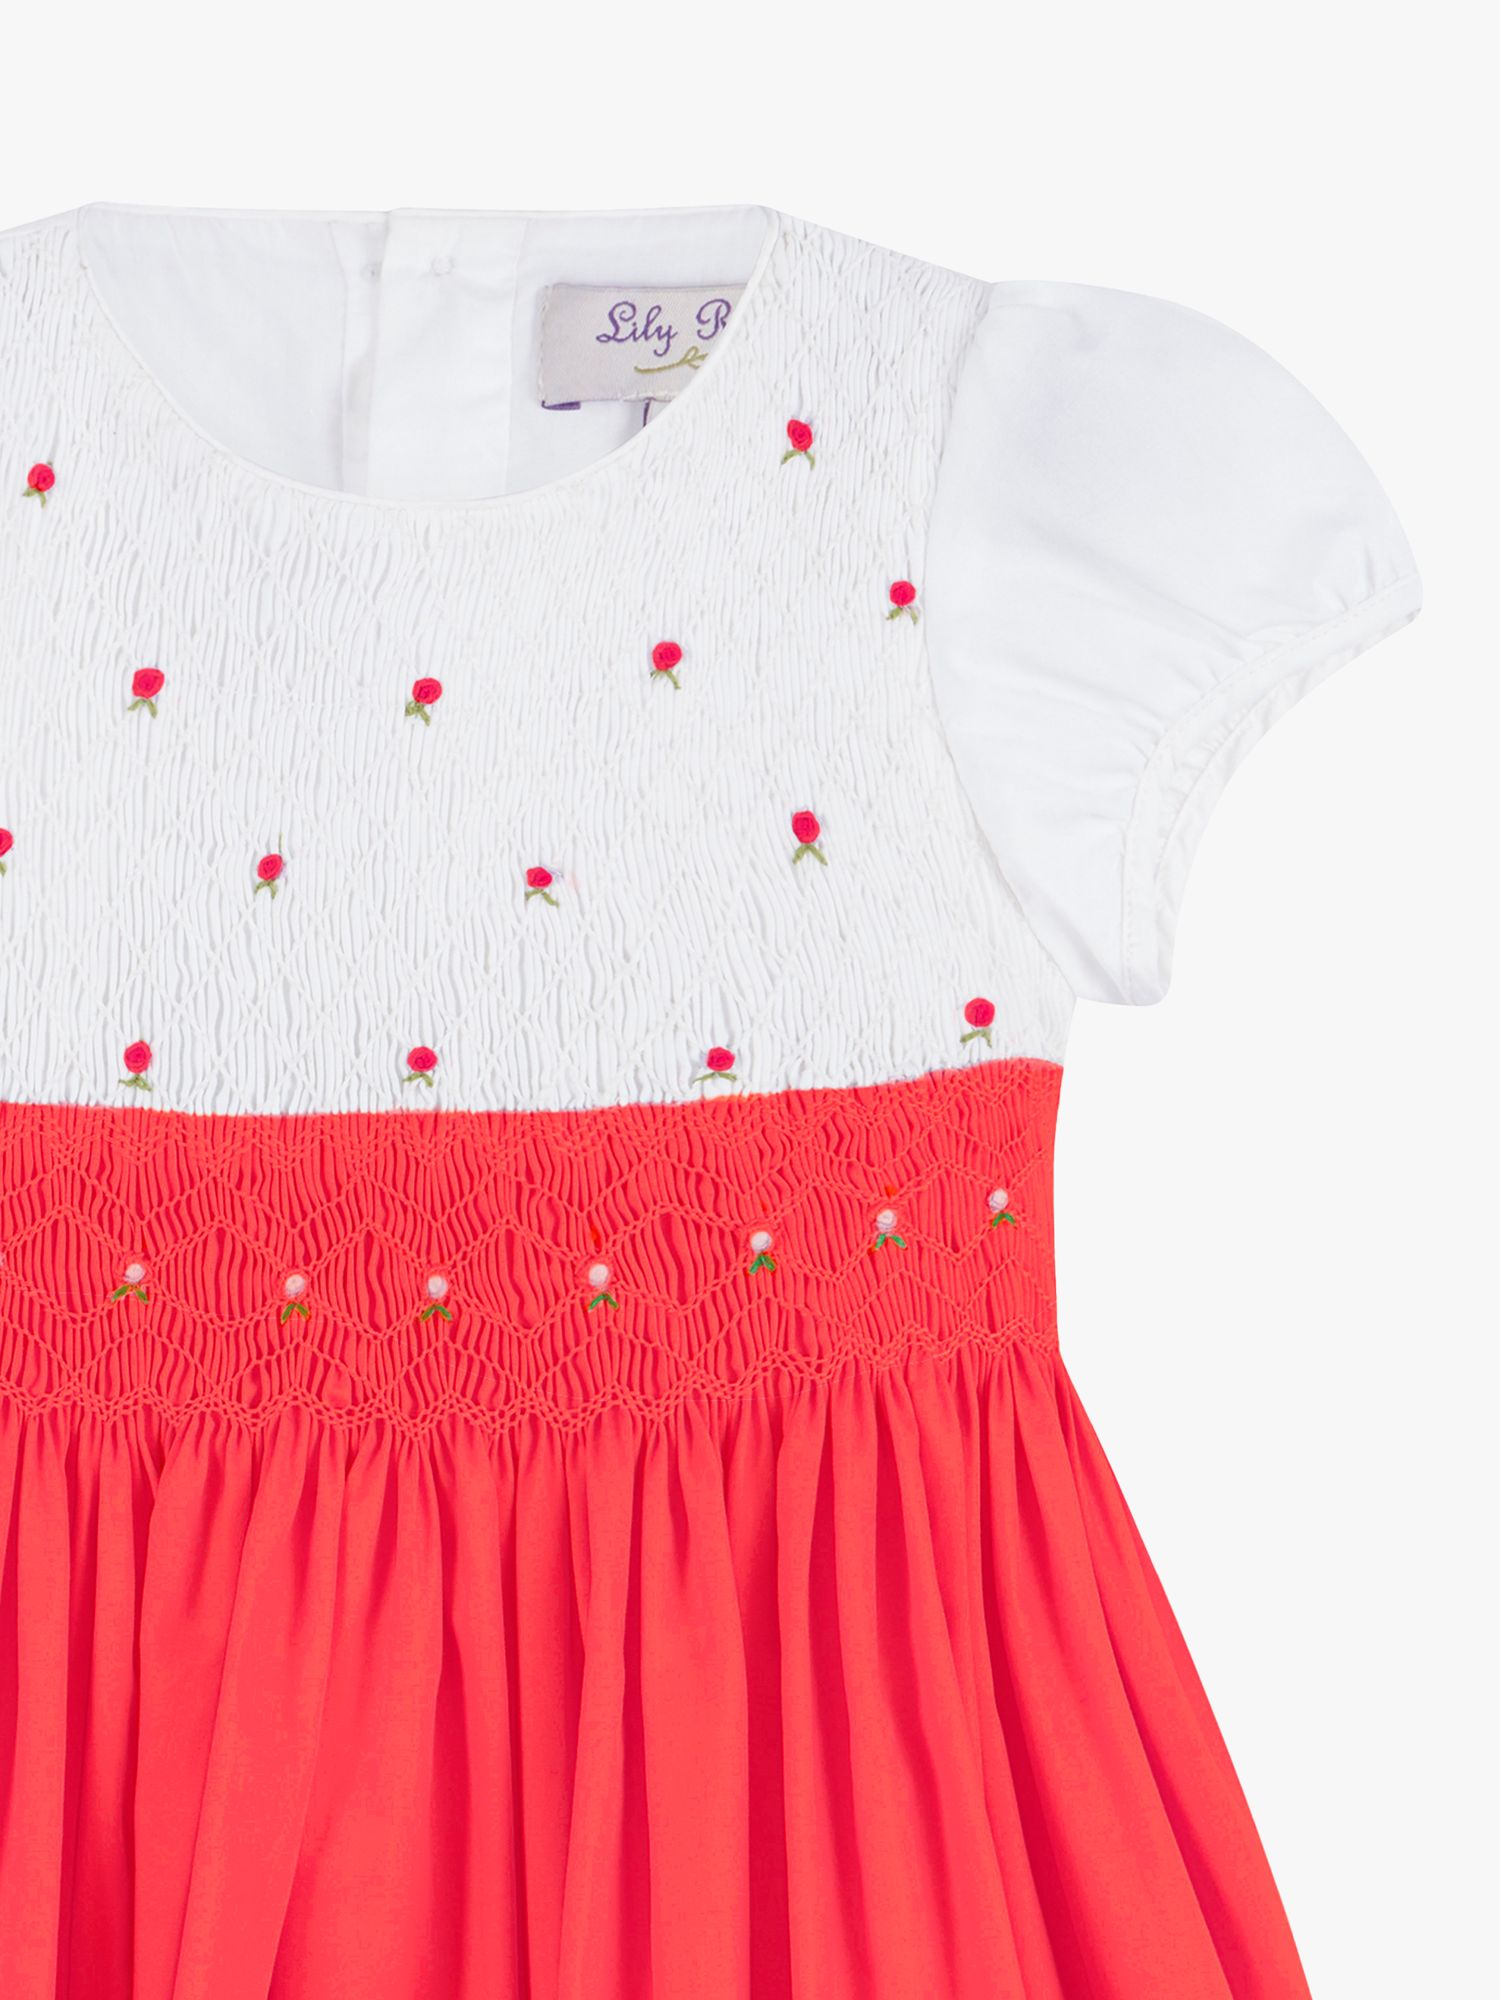 Buy Trotters Kids' Willow Rose Hand Smocked Bodice Dress, Watermelon Online at johnlewis.com